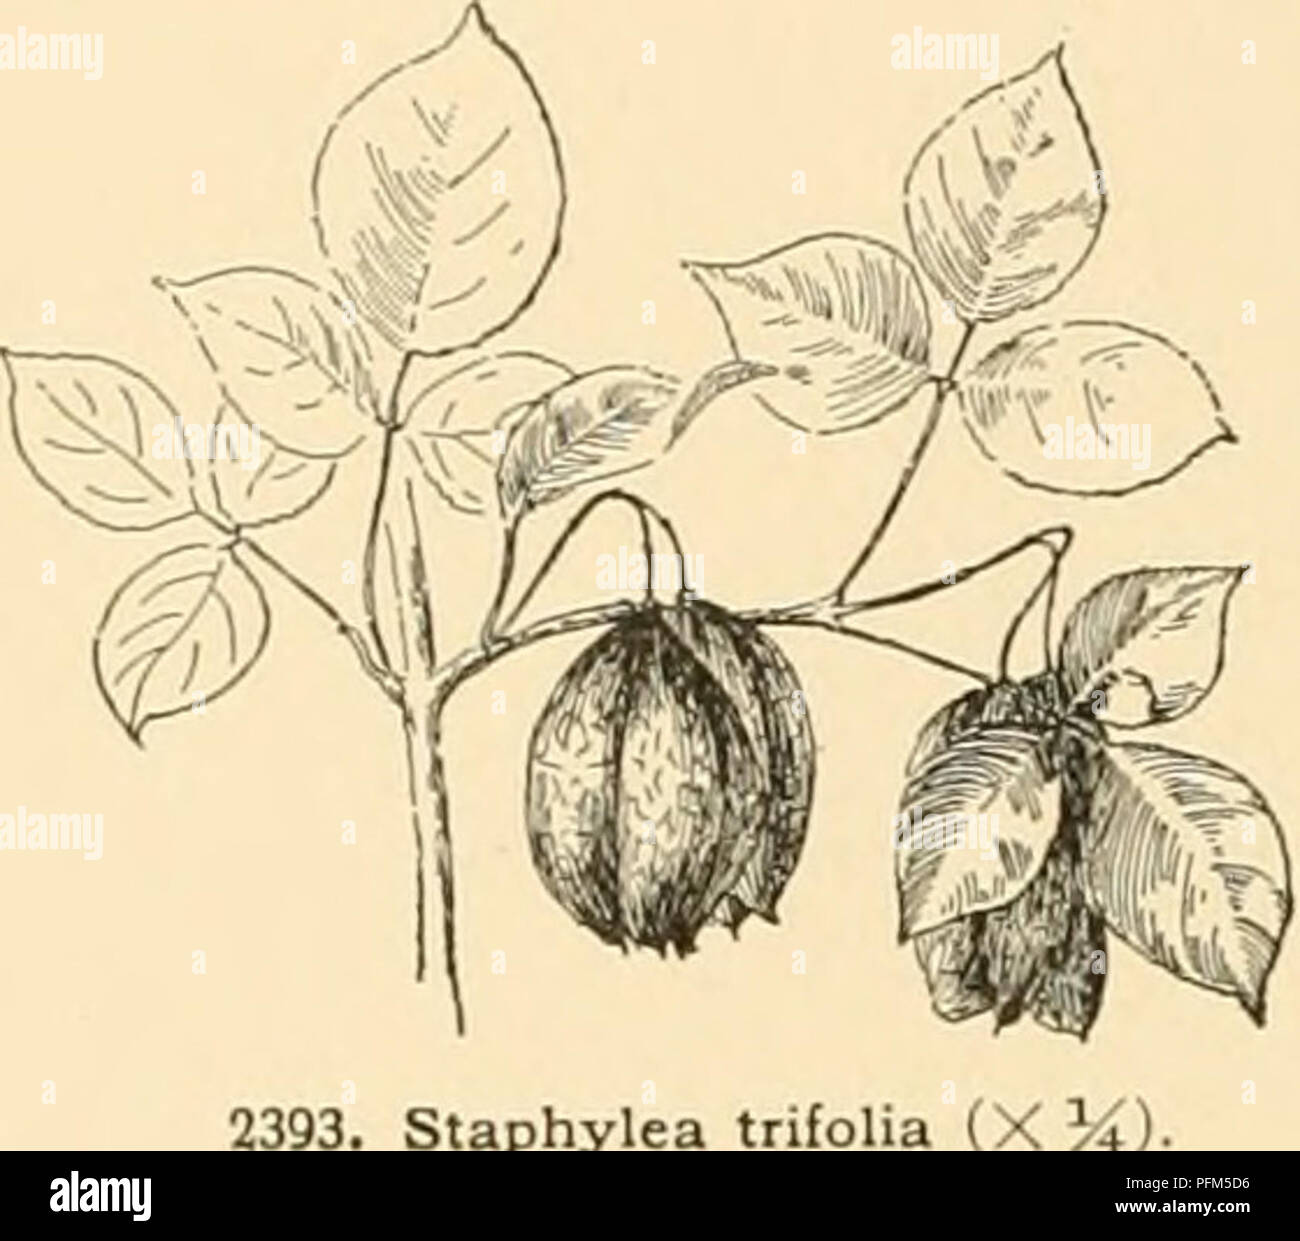 . Cyclopedia of American horticulture : comprising suggestions for cultivation of horticultural plants, descriptions of the species of fruits, vegetables, flowers, and ornamental plants sold in the United States and Canada, together with geographical and biographical sketches. Gardening; Horticulture; Horticulture; Horticulture. 1718 STAPHYLEA with 1 or few subglobose rather large, bony seeds in each cell. A. Lvs. S-foUolate. B. Middle leaflet short-stalked: panicle sessile. BnmAIda, DC. Shrub, 6 ft. high, with upright and spreading slender branches; Ifl^. I'ImihIIv oval to ovate, shortly acum Stock Photo